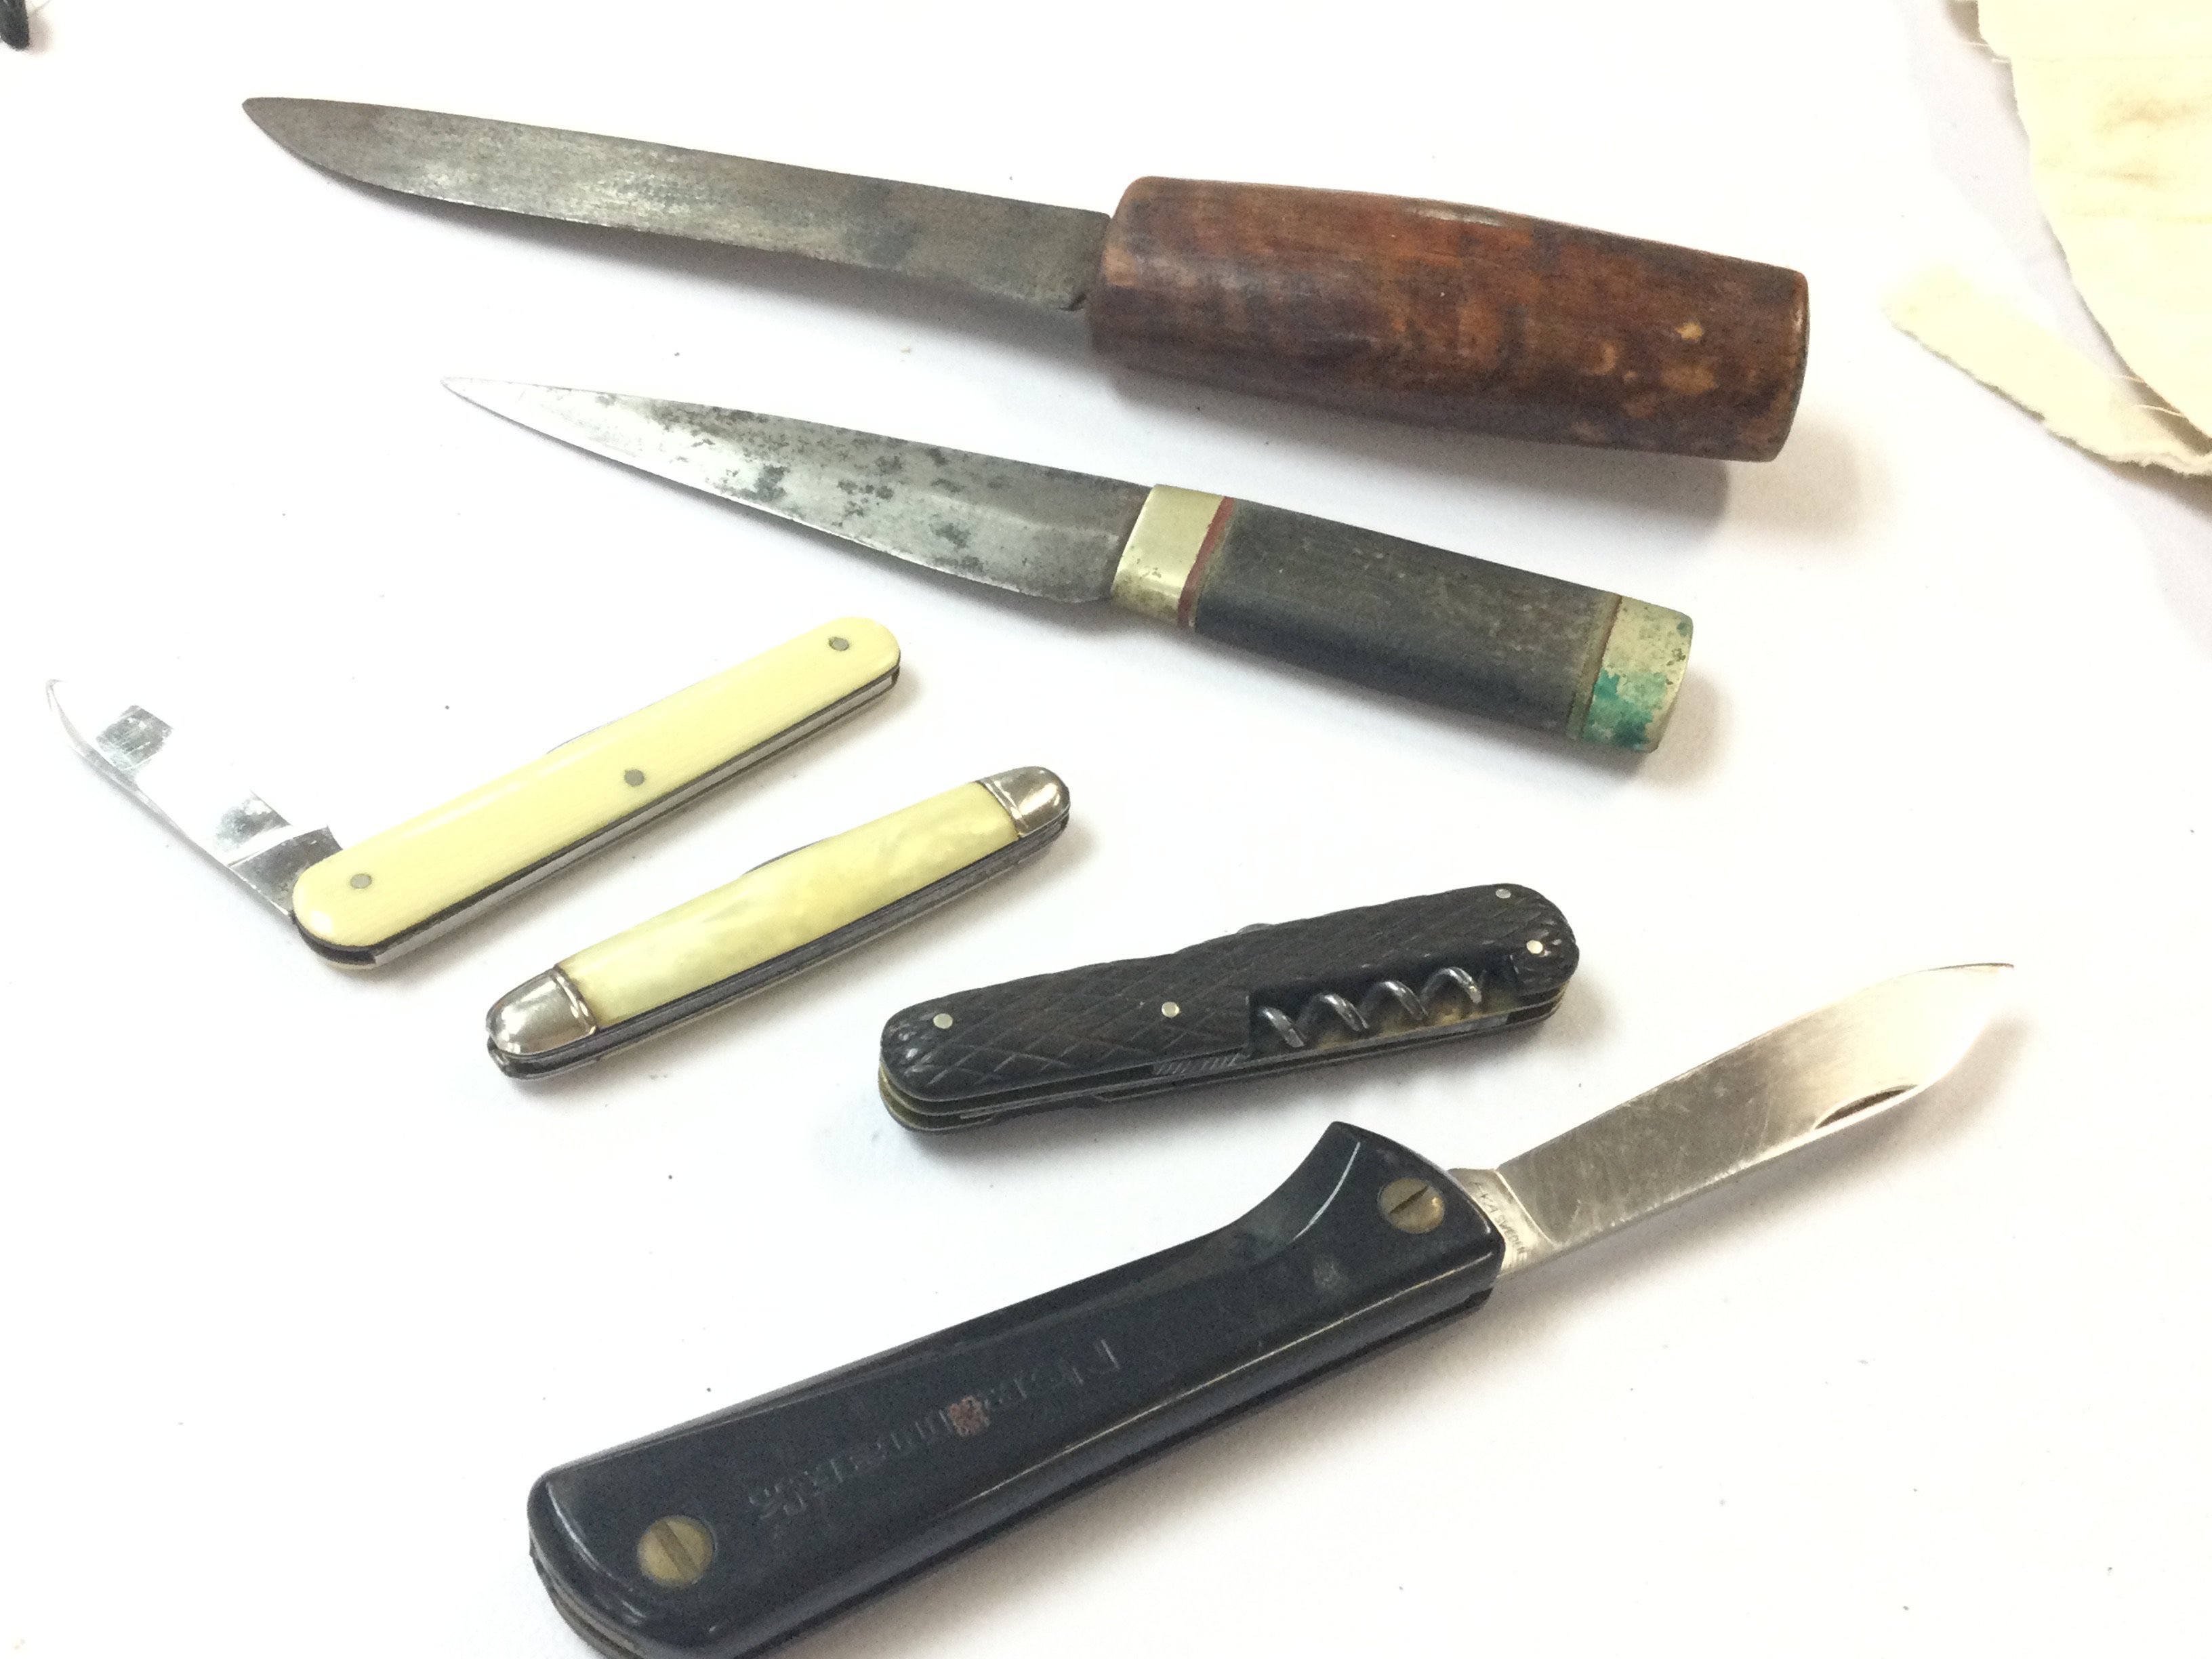 Pen knives (one knife removed due to illegal reasons) - Image 2 of 3